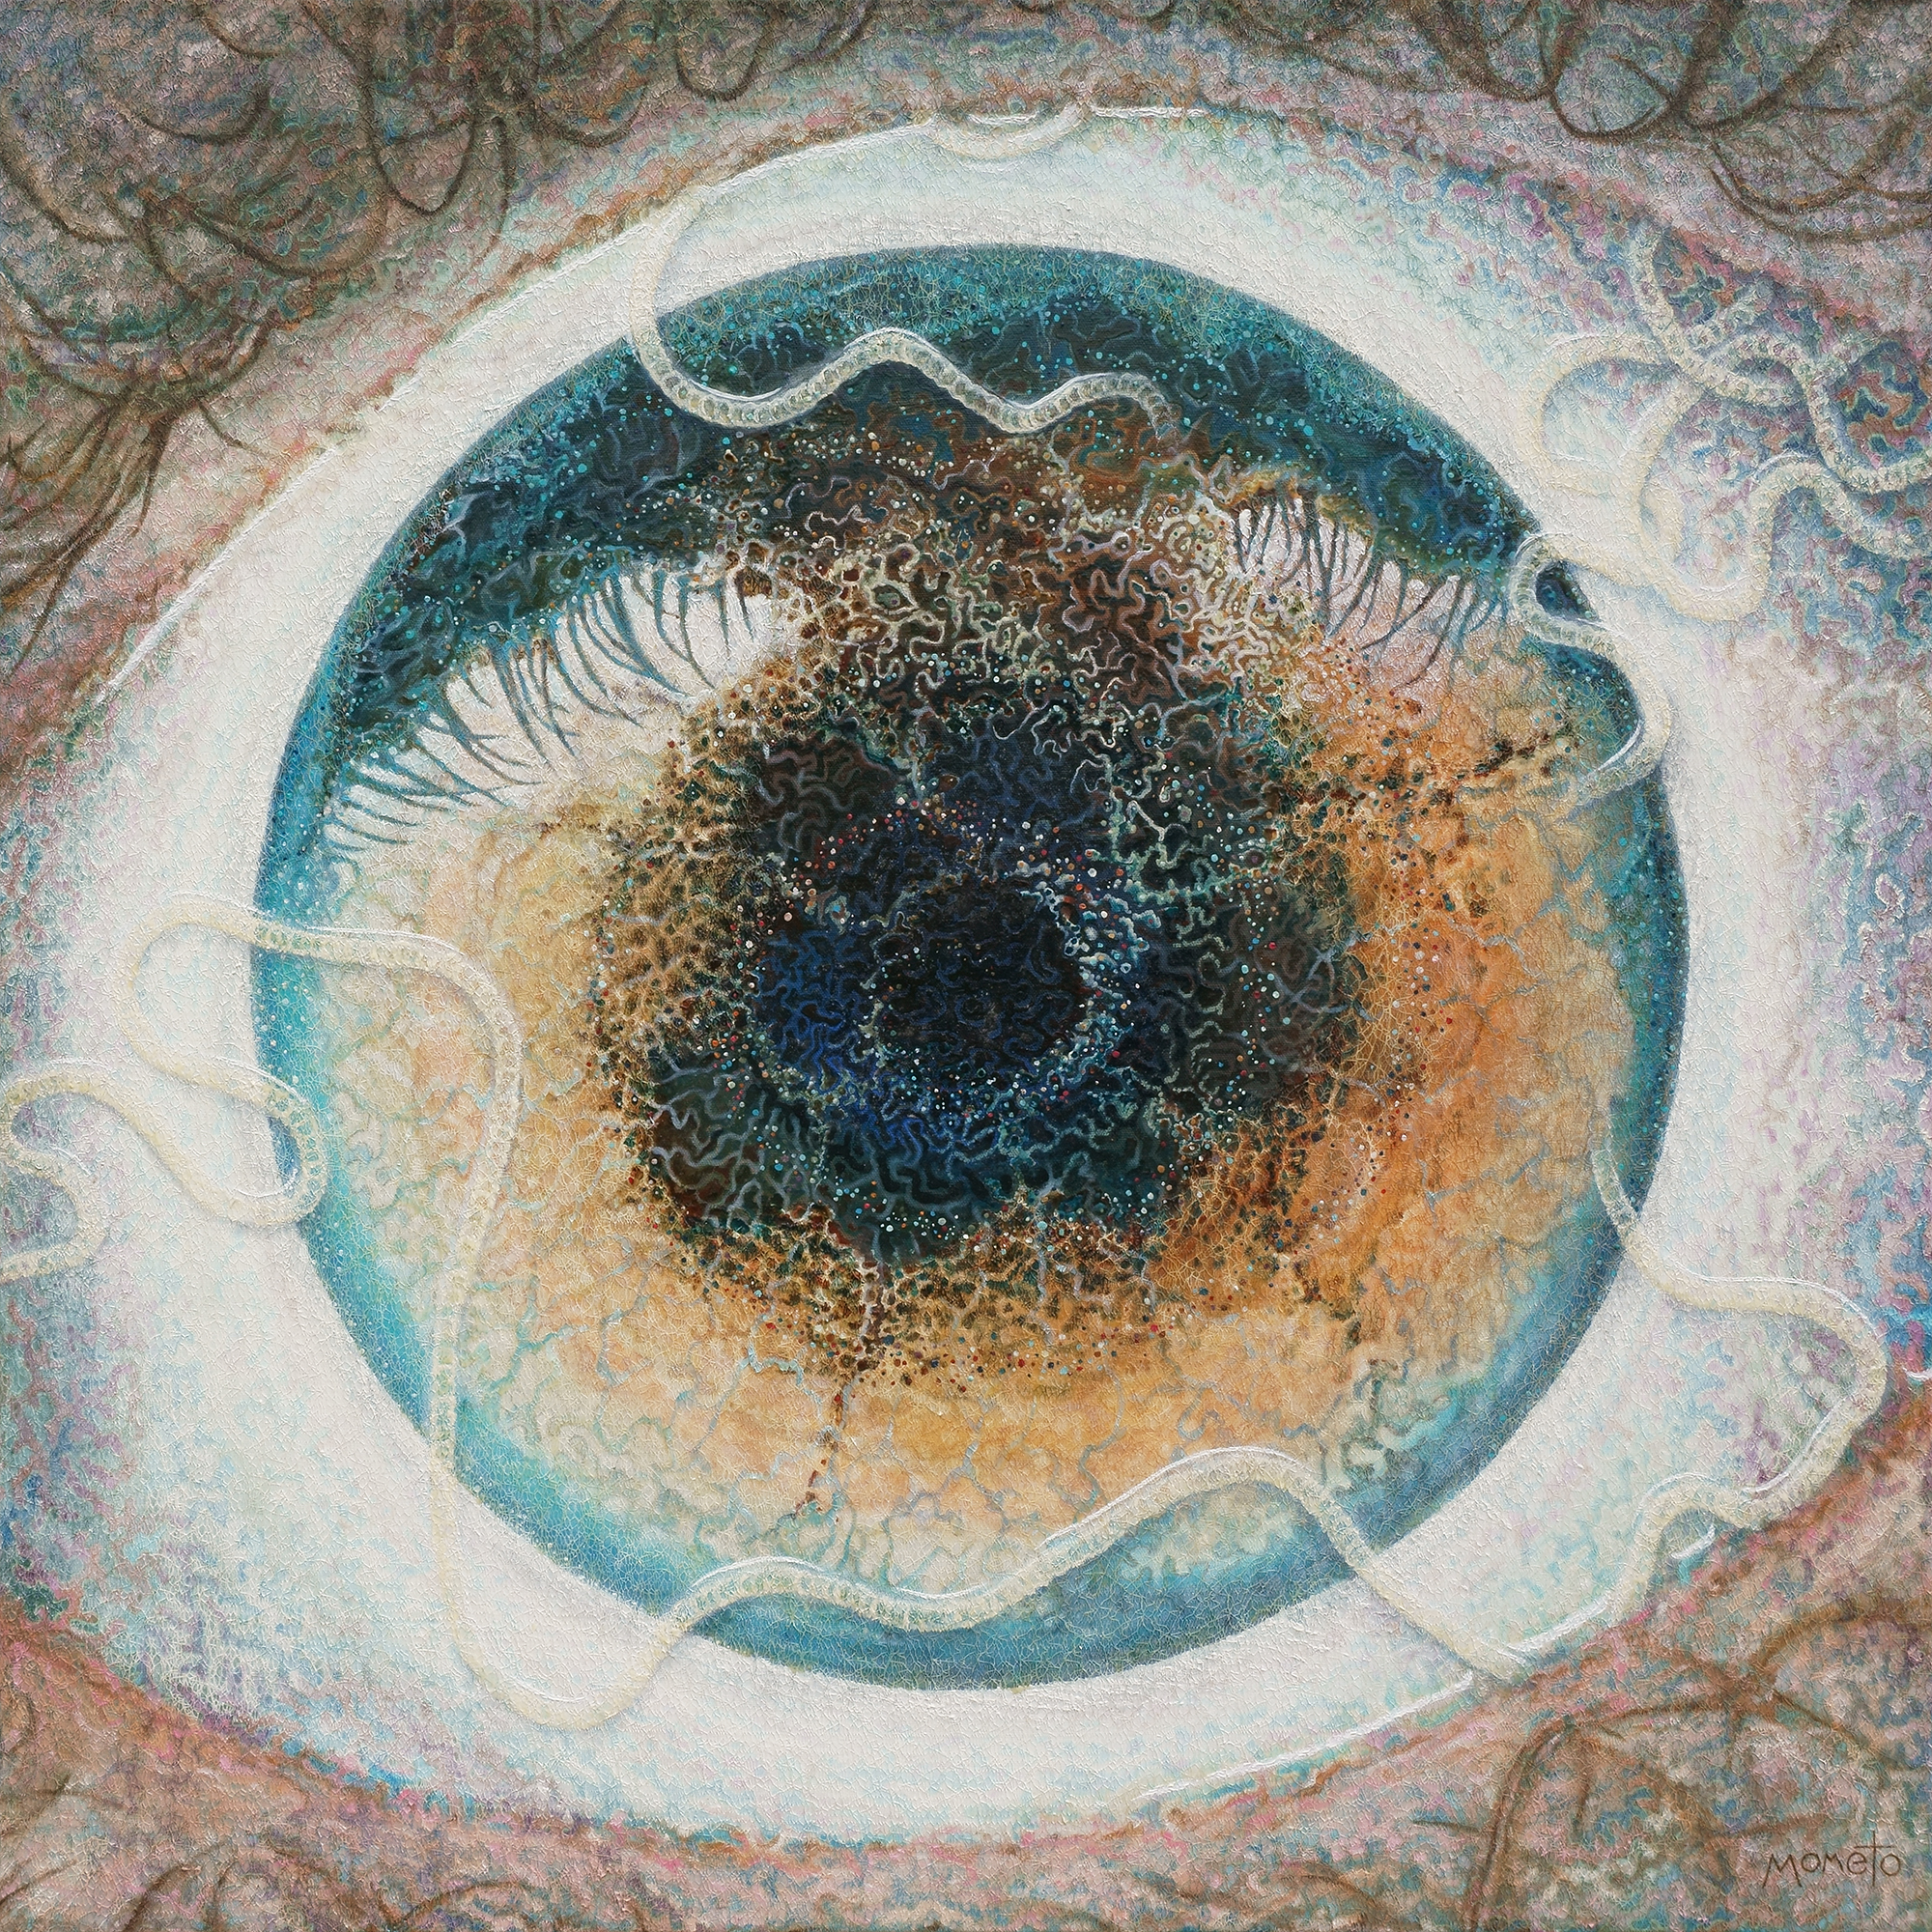 An Artist Discovered a Parasitic Worm in His Eye, Which He Said 'Guided'  His Work